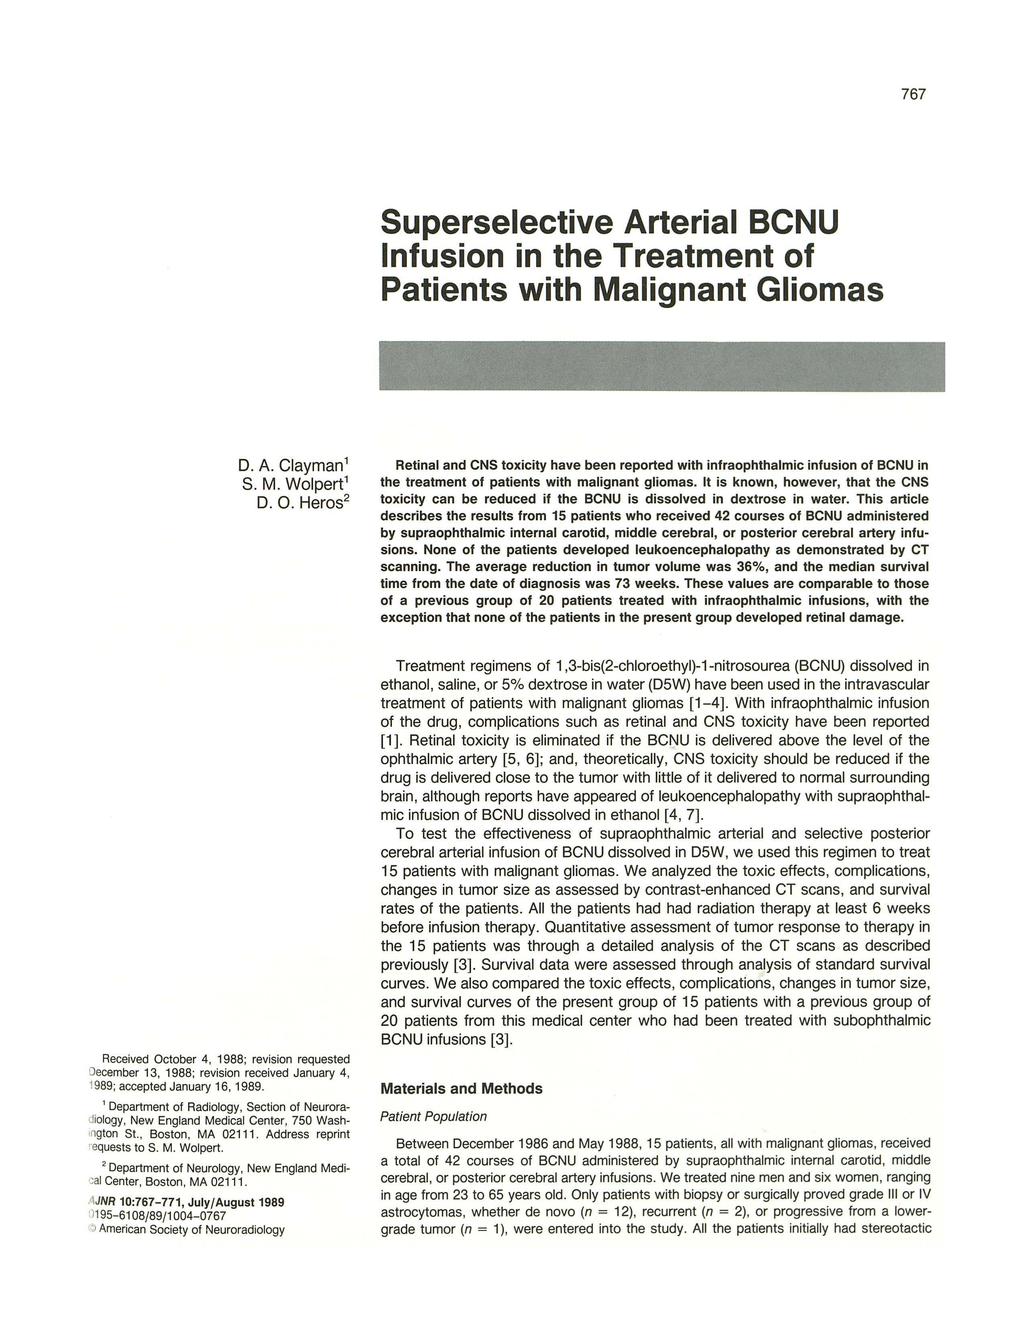 767 Superselective Arterial BCNU Infusion in the Treatment of Patients with Malignant Gliomas D. A. Clayman 1 S.M. Wolpert 1 D. 0.